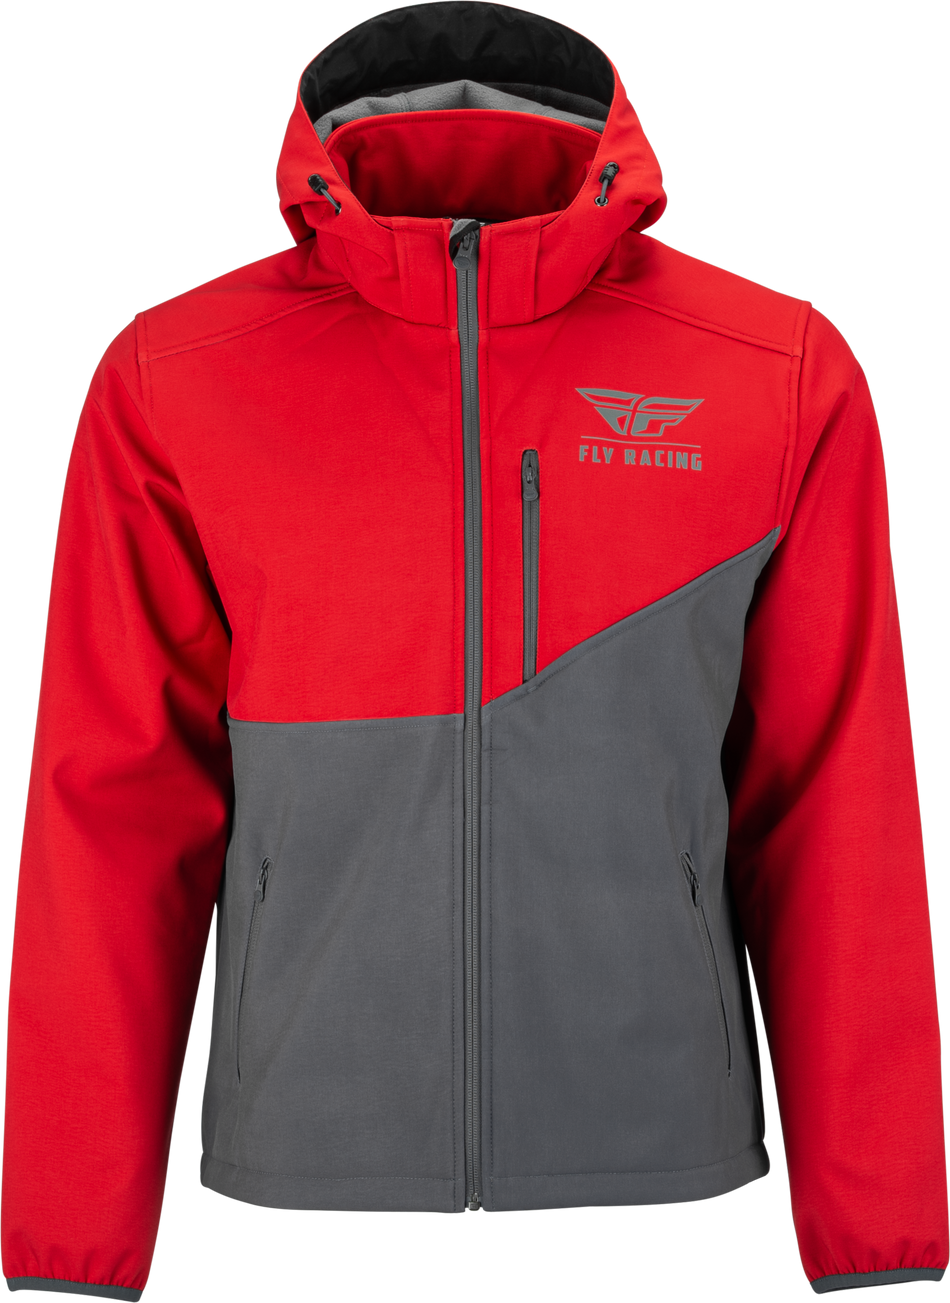 FLY RACING Checkpoint Jacket Grey/Red 3x 354-63843X